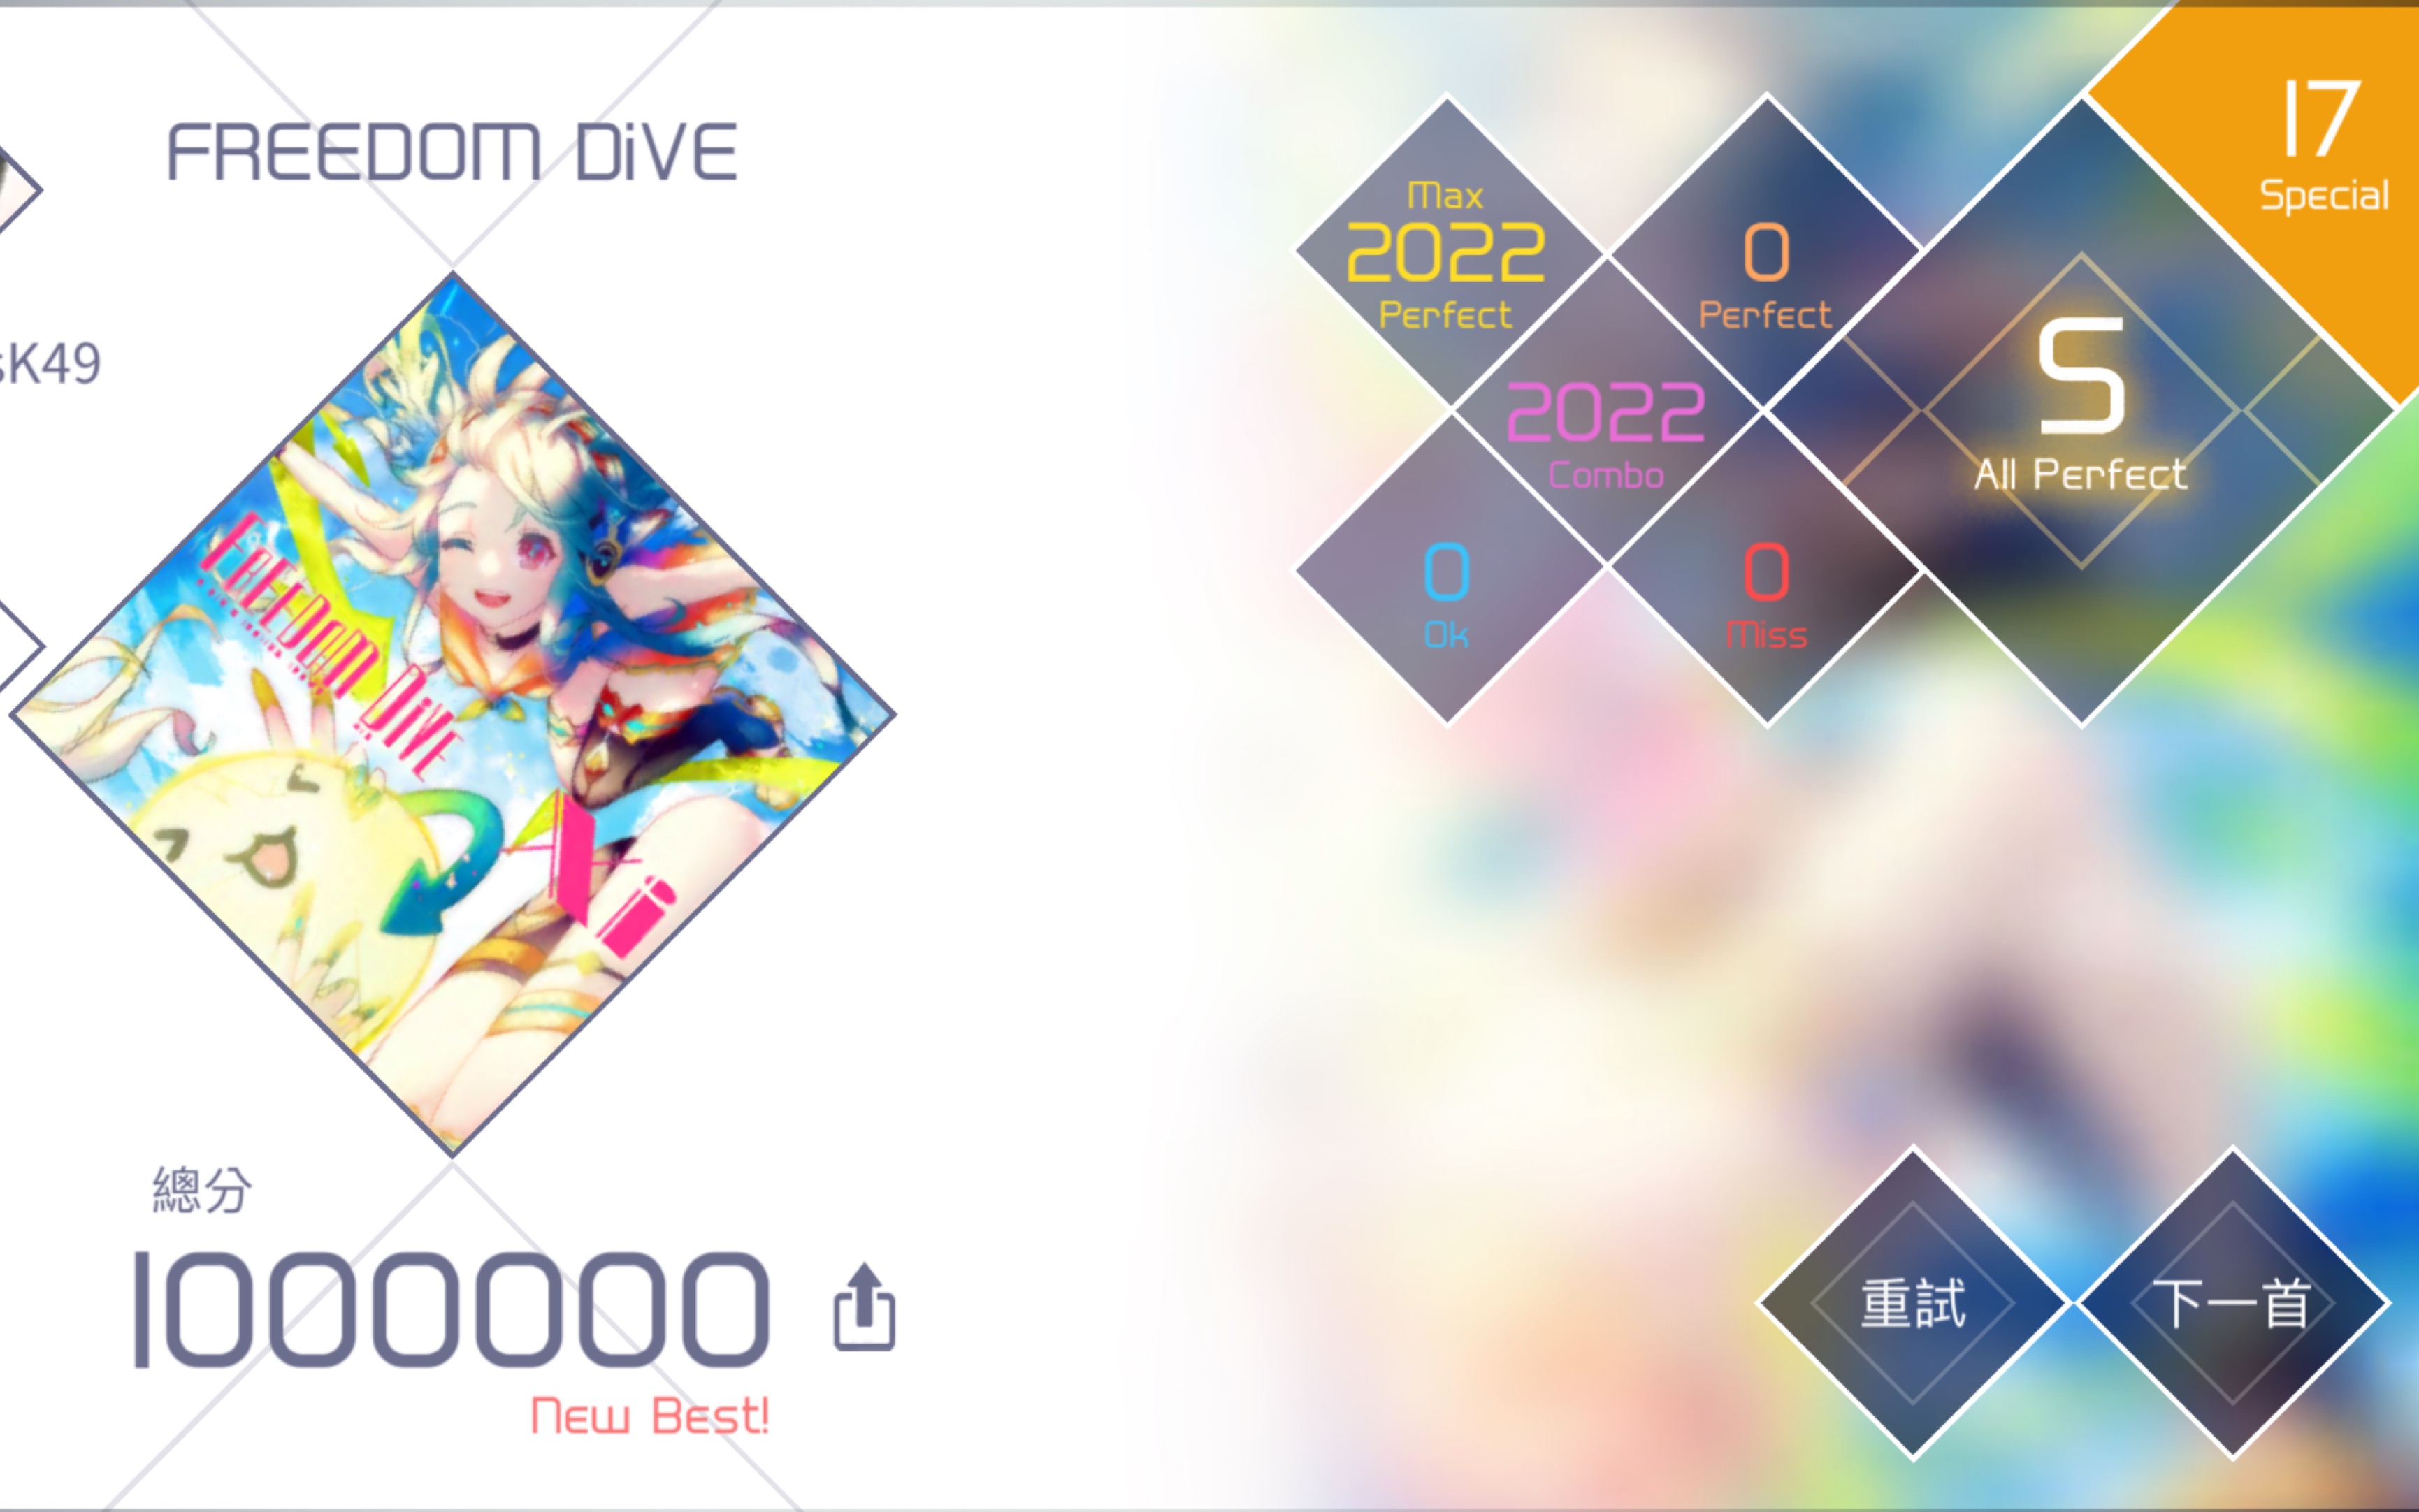 【VOEZ】FREEDOM DIVE [Special 17] AMP 1000000pts